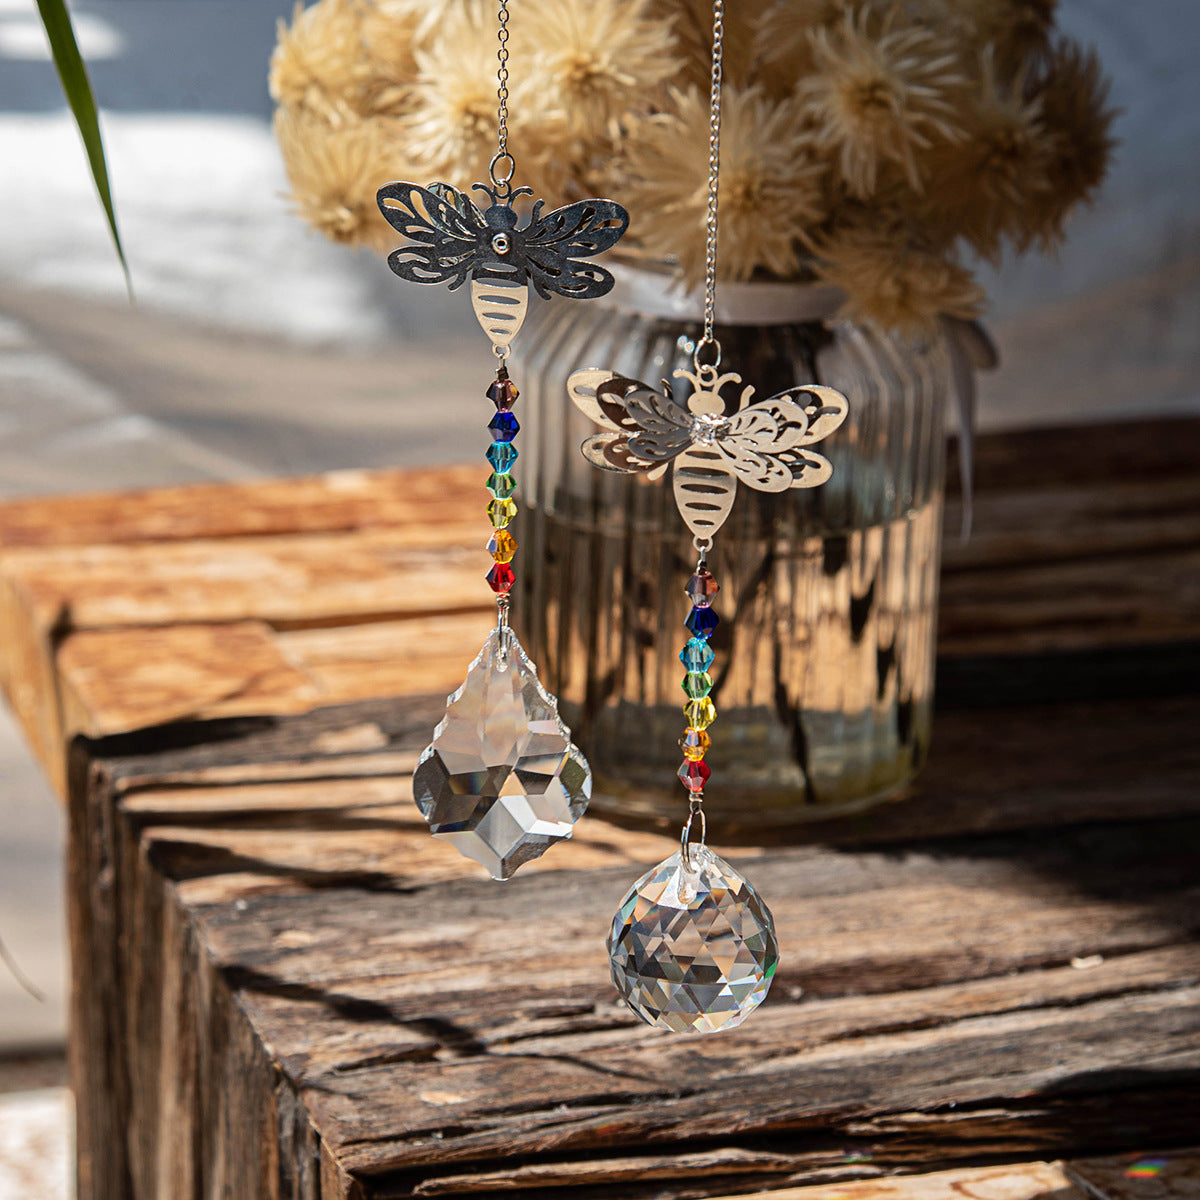 Bee Themed Colorful Crystal Suncatcher Hanging